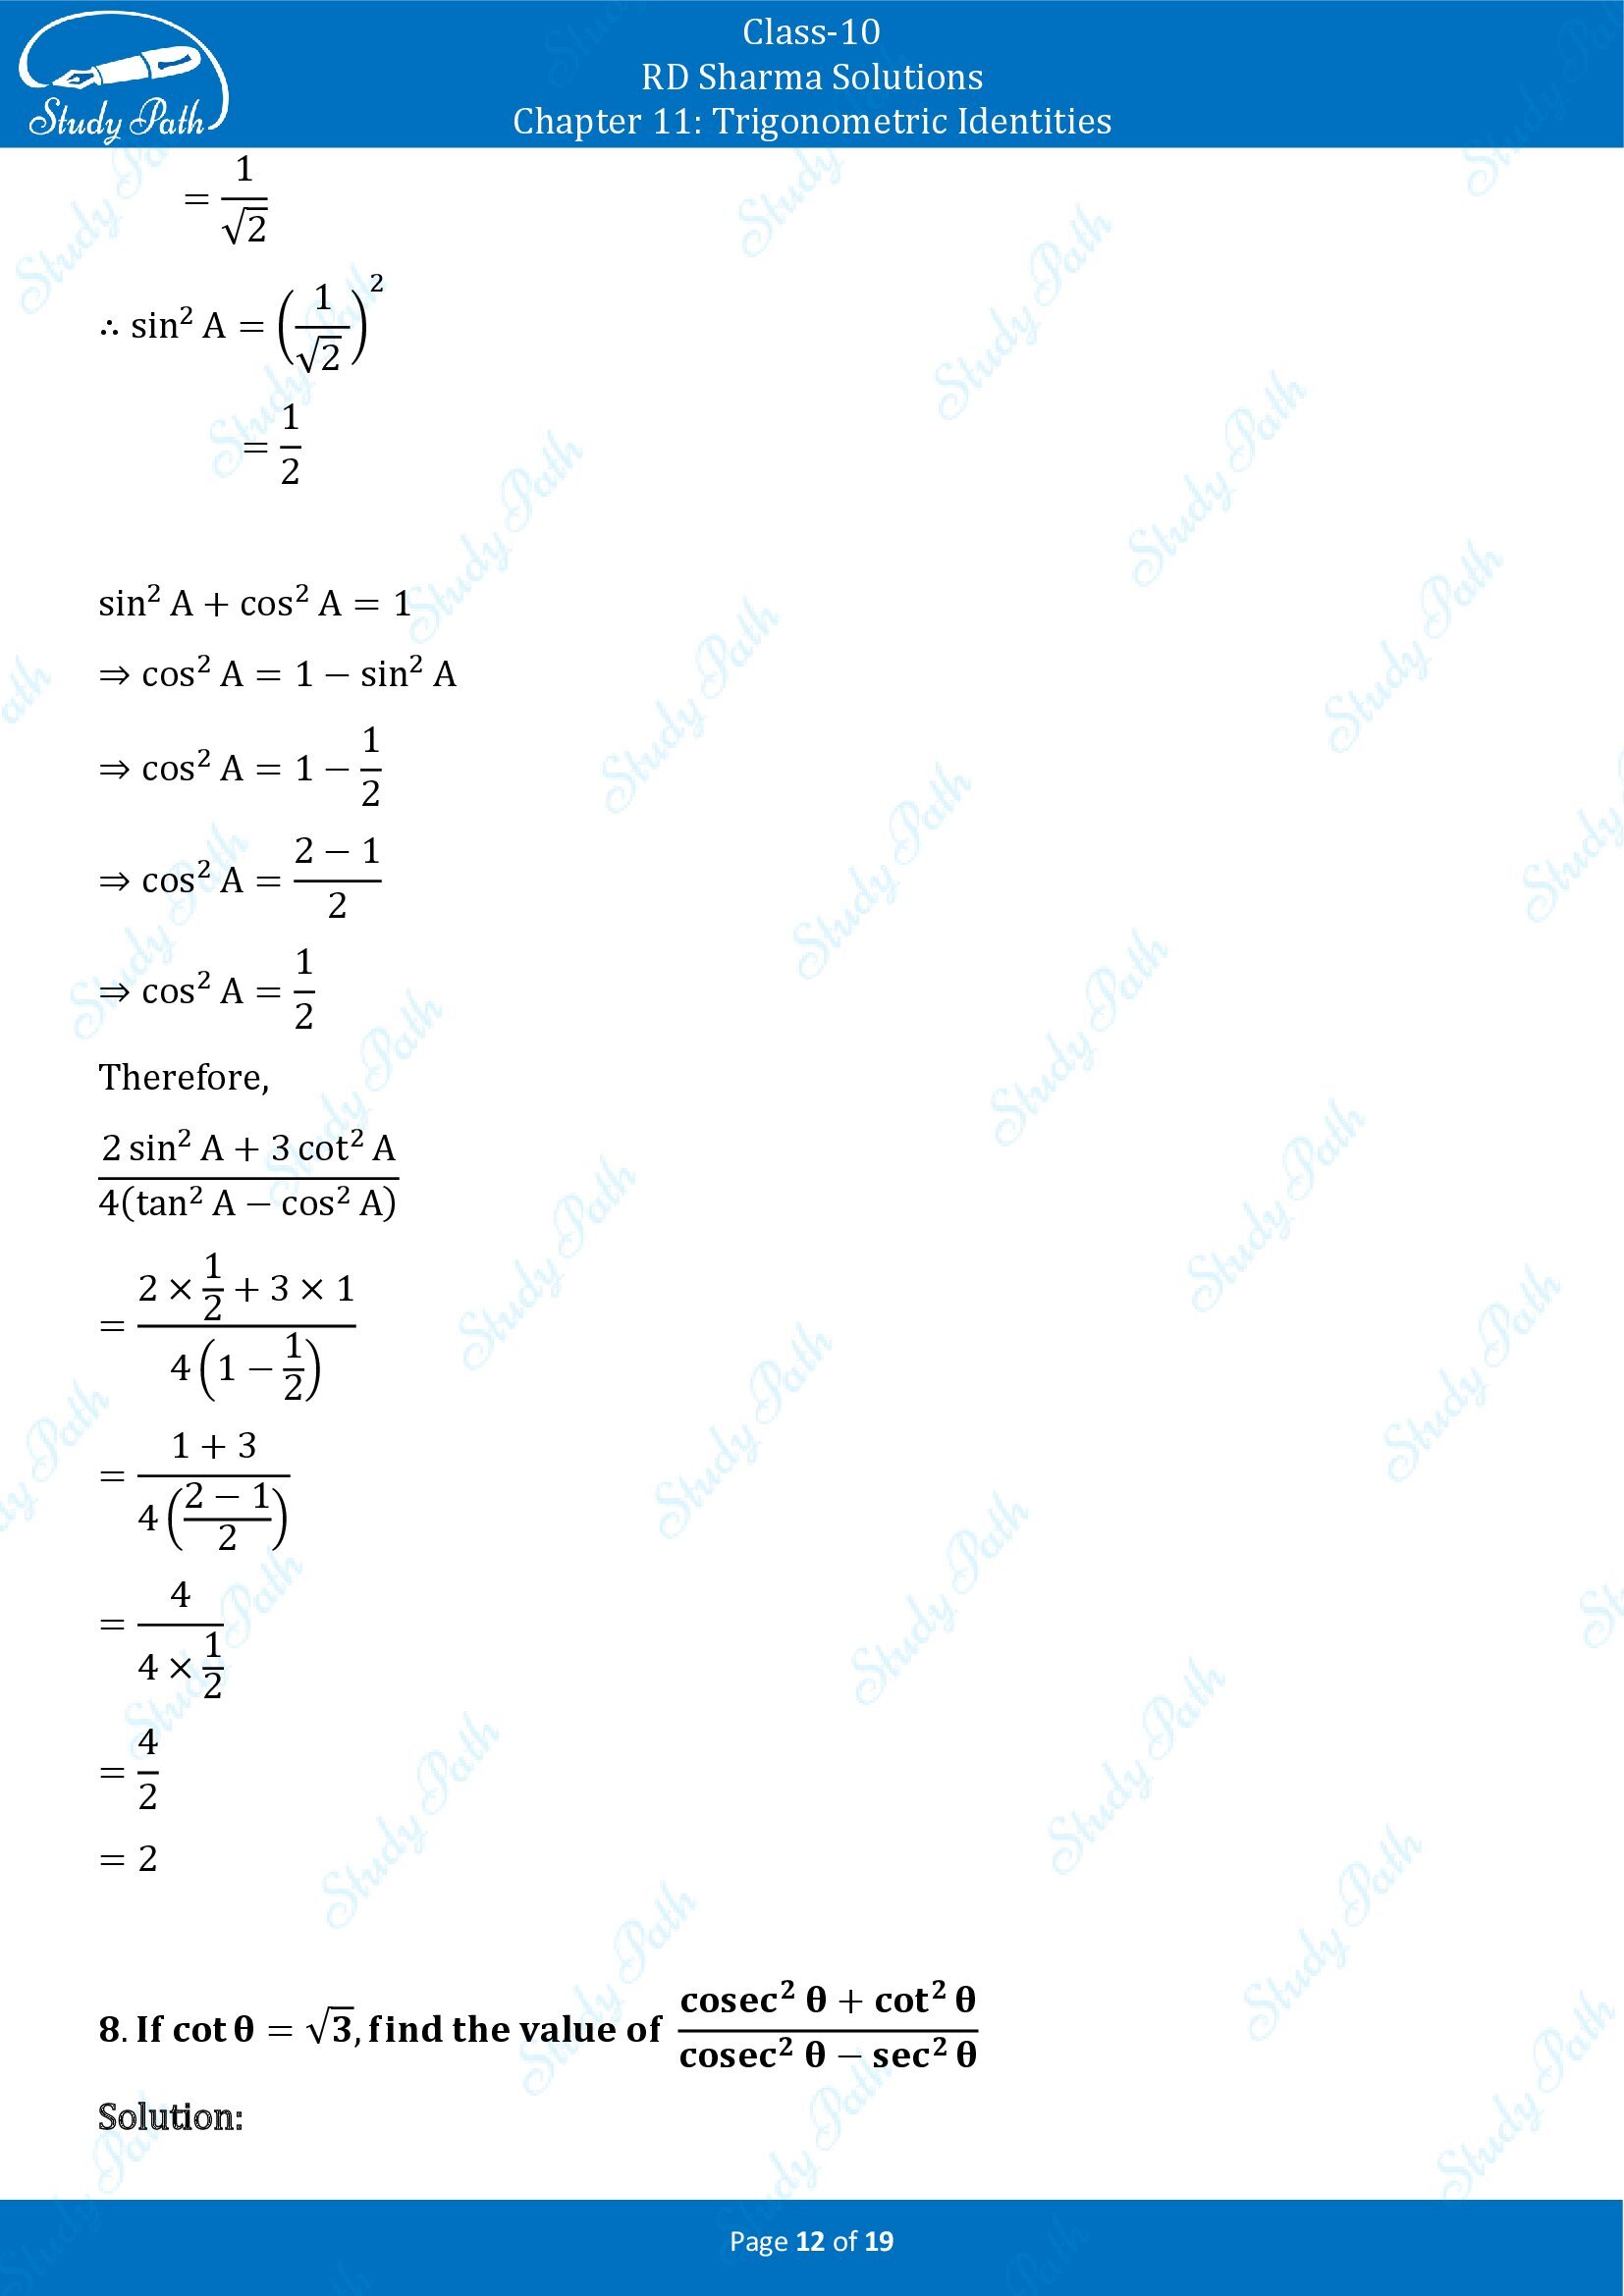 RD Sharma Solutions Class 10 Chapter 11 Trigonometric Identities Exercise 11.2 00012